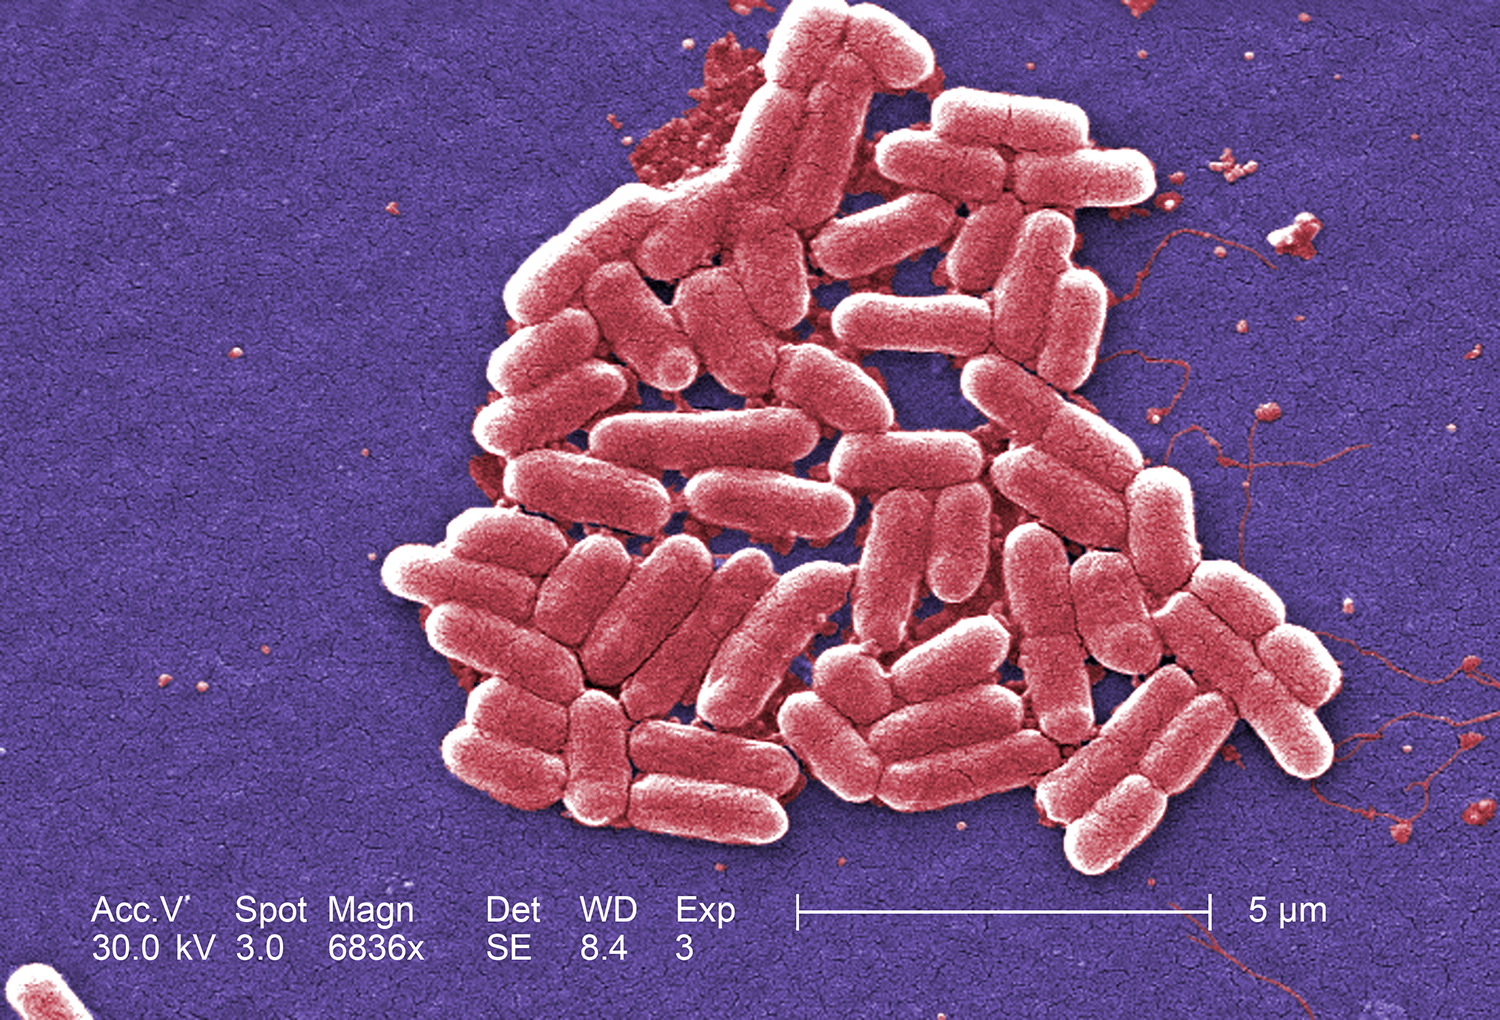 Digitally colorized scanning electron microscopic (SEM) of Escherichia coli bacteria. Copyright holder: Janice Haney Carr. Link: https://phil.cdc.gov/Details.aspx?pid=10068.